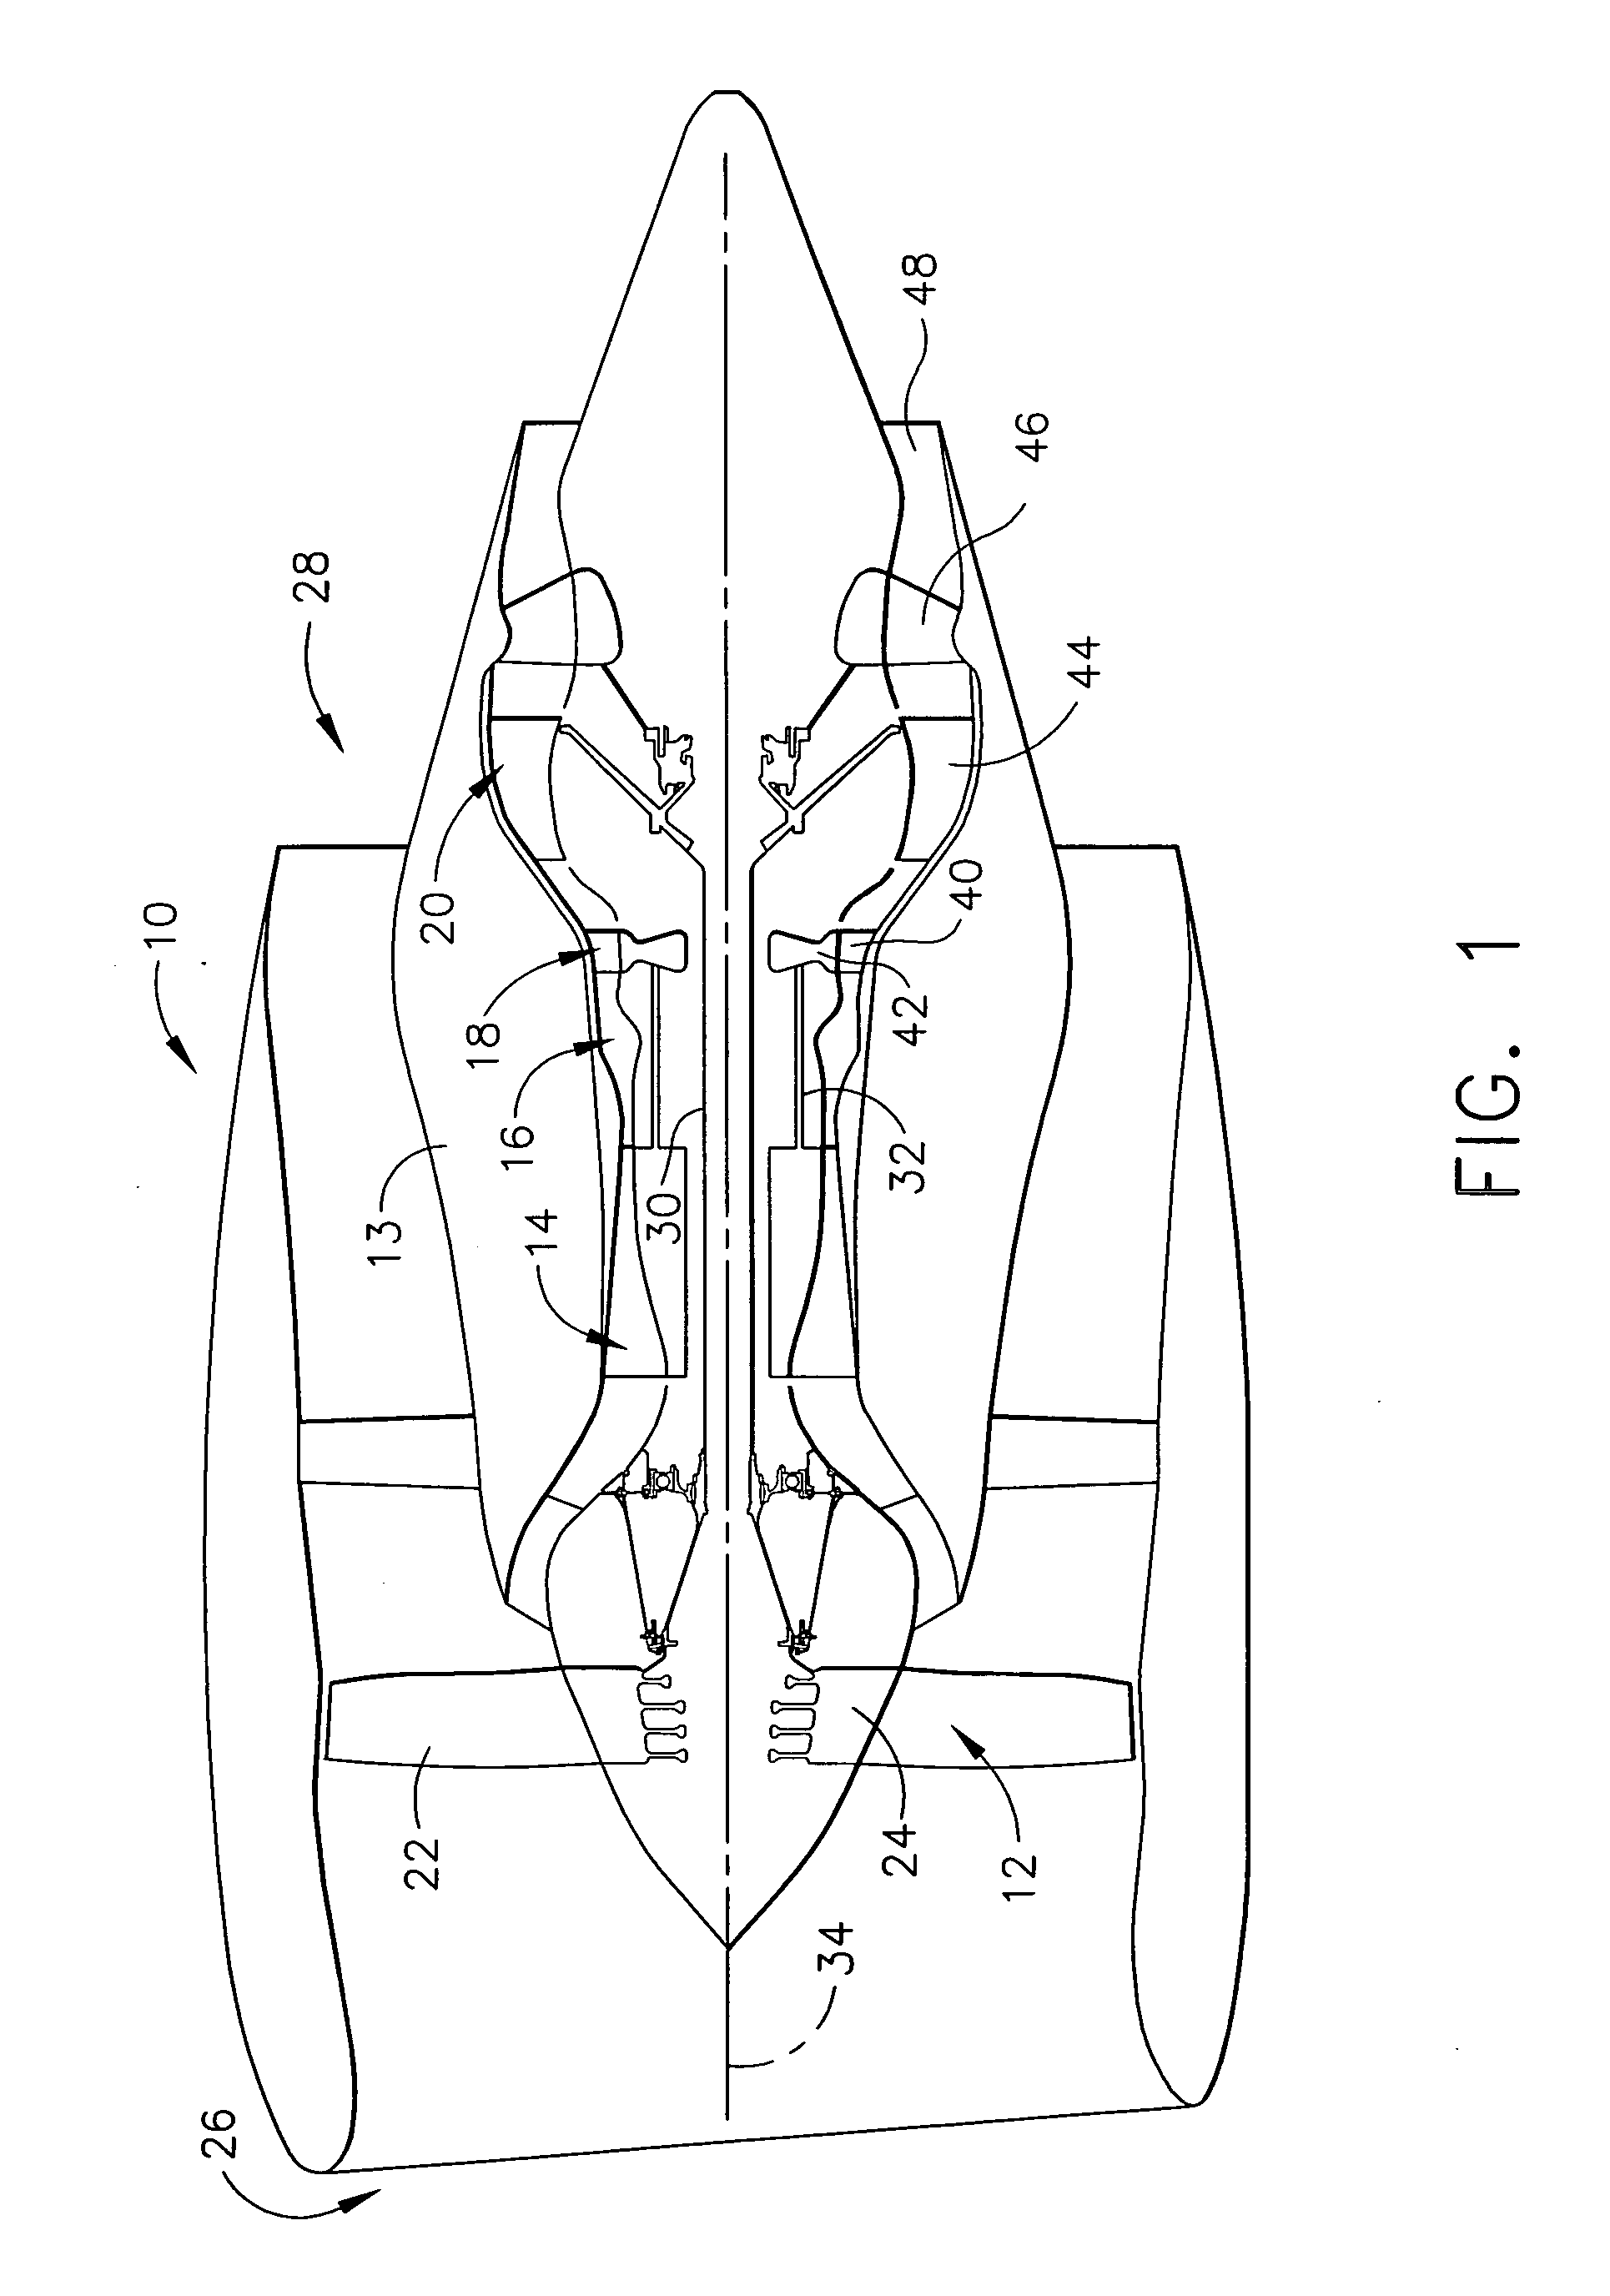 Methods and apparatus for cooling gas turbine engine components